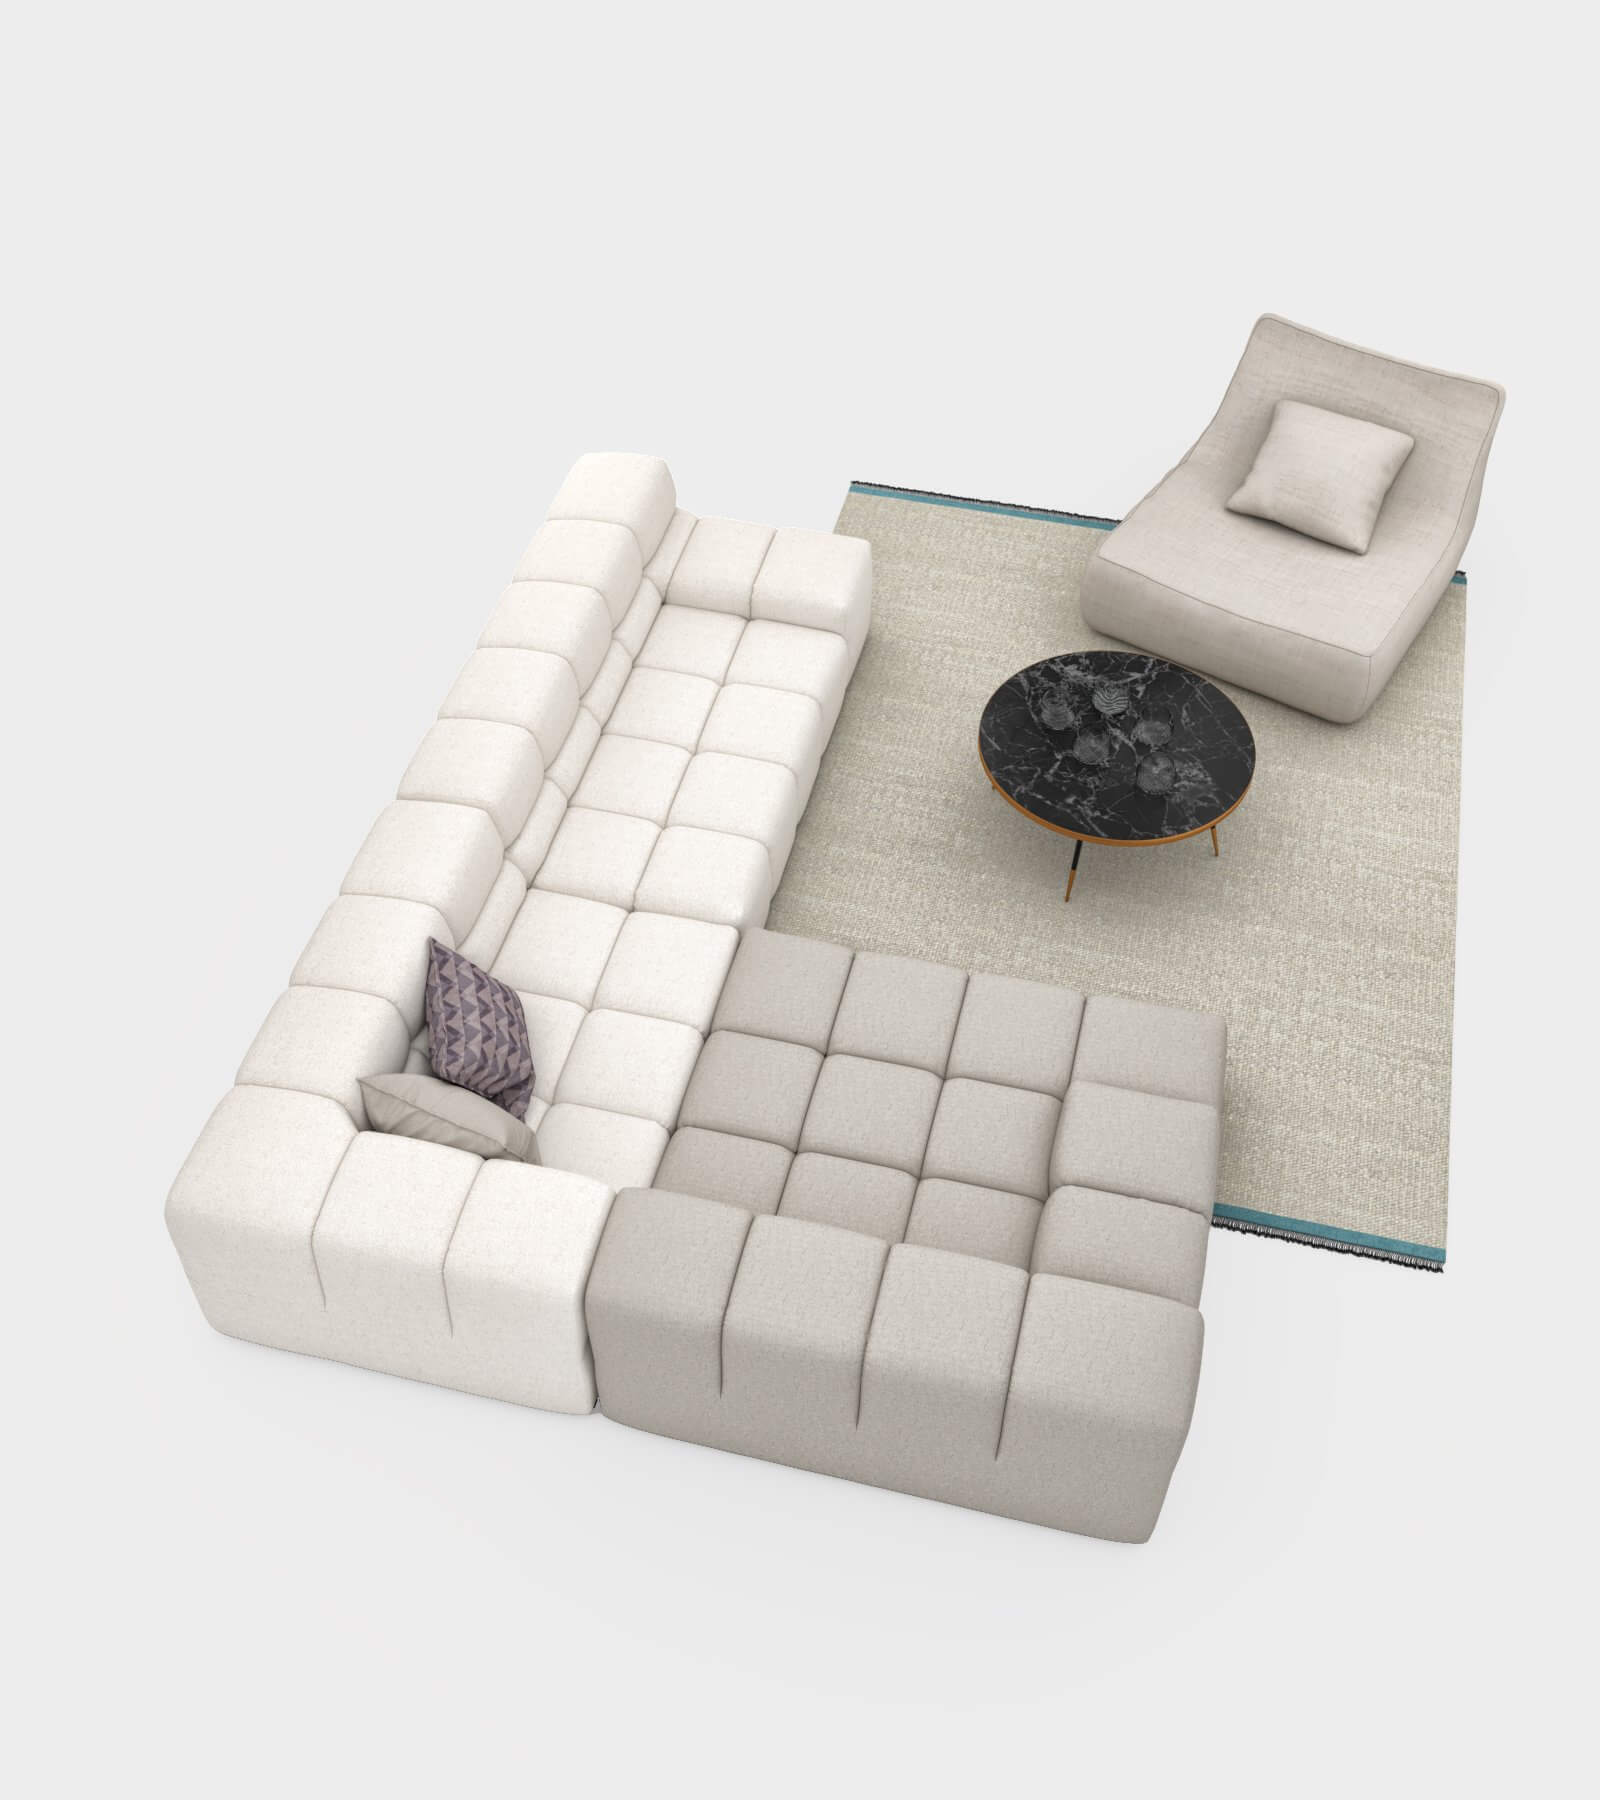 Living room couch set-1 3D Model